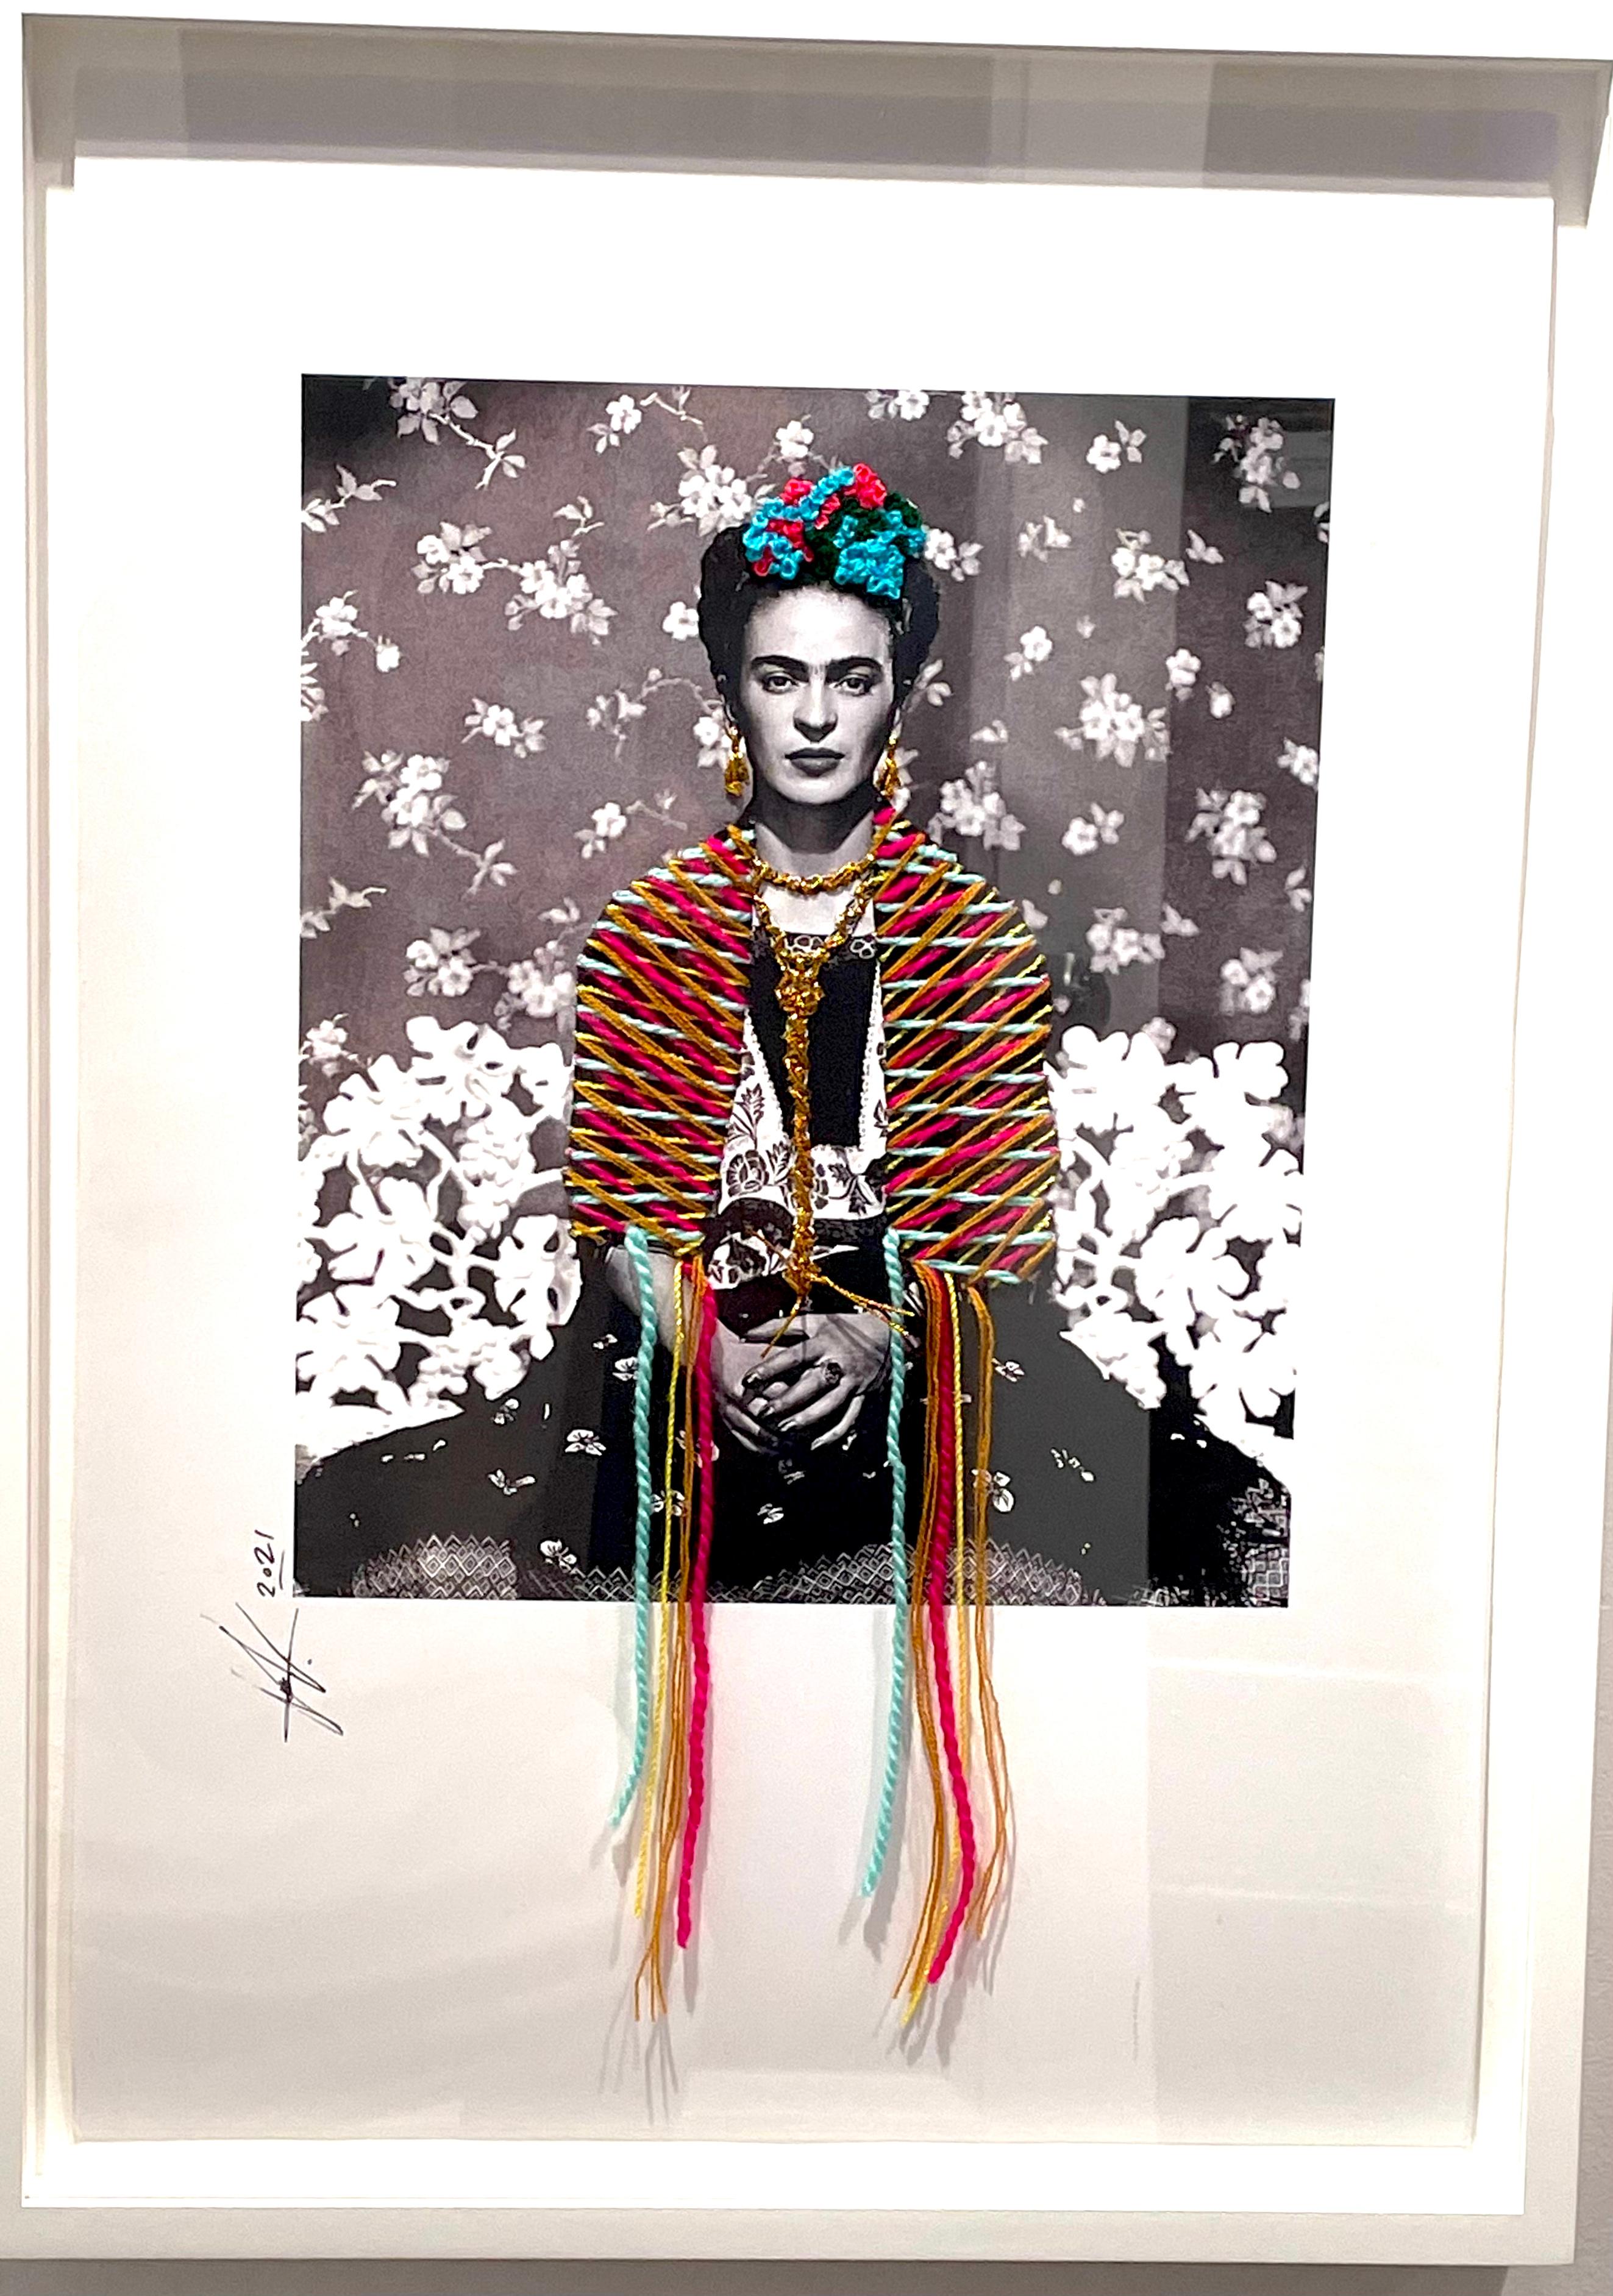 Frida - Embroidered Image with thread - Mixed Media Art by Victoria Villa